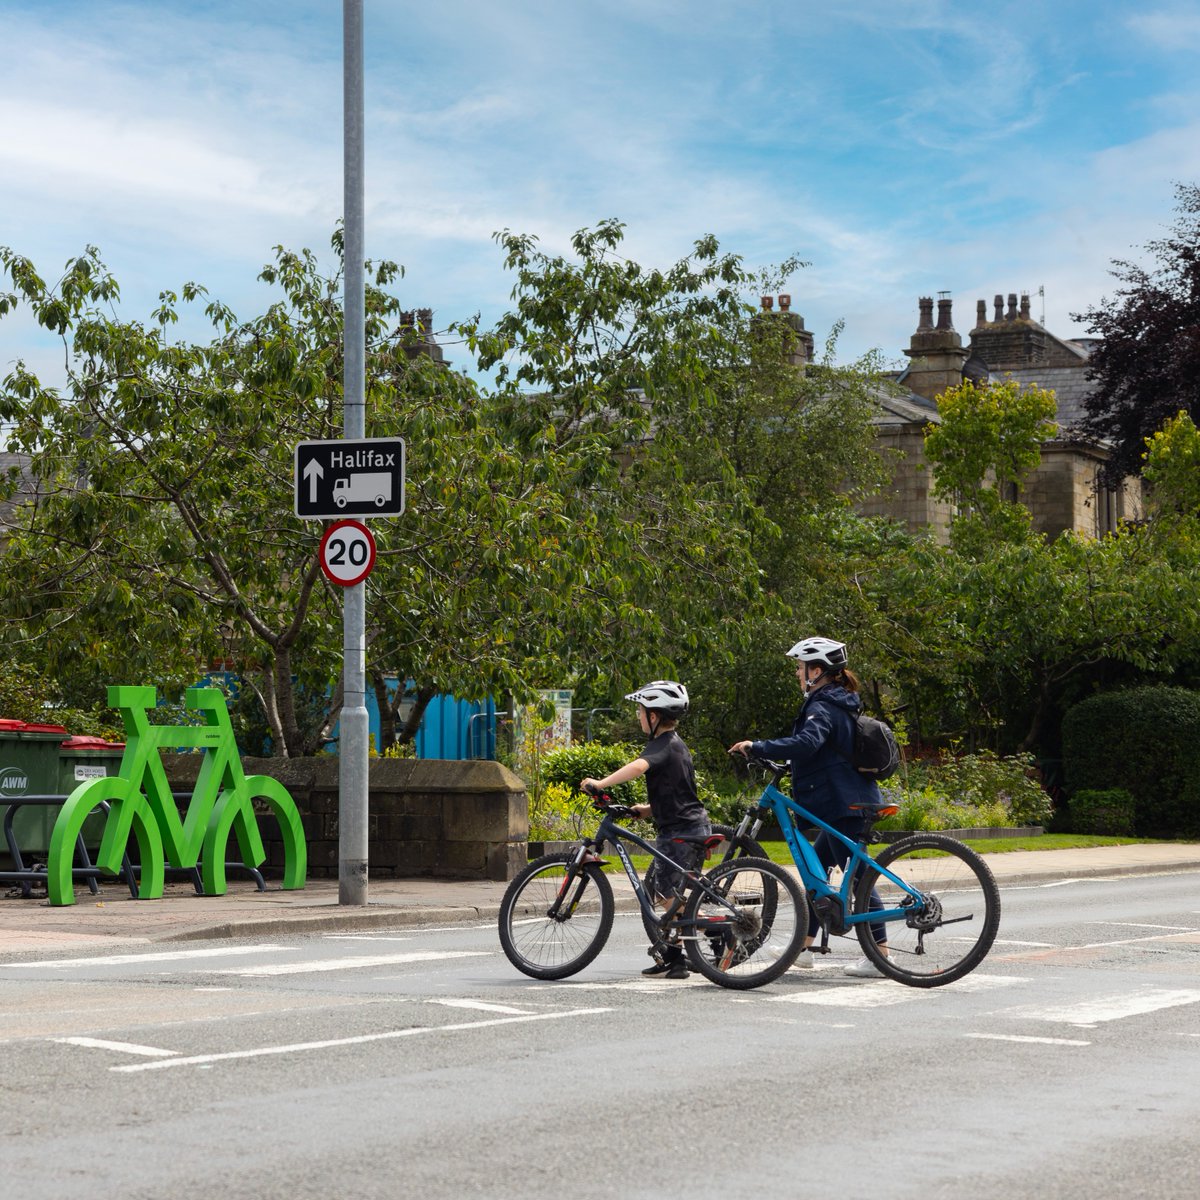 🚲 The Active Todmorden Project is focused on strengthening #Todmorden as a hub for walking and active pursuits! 

Learn more on our website 
➡️ todmordentowndeal.co.uk

#ActiveTod #TodmordenTownDeal